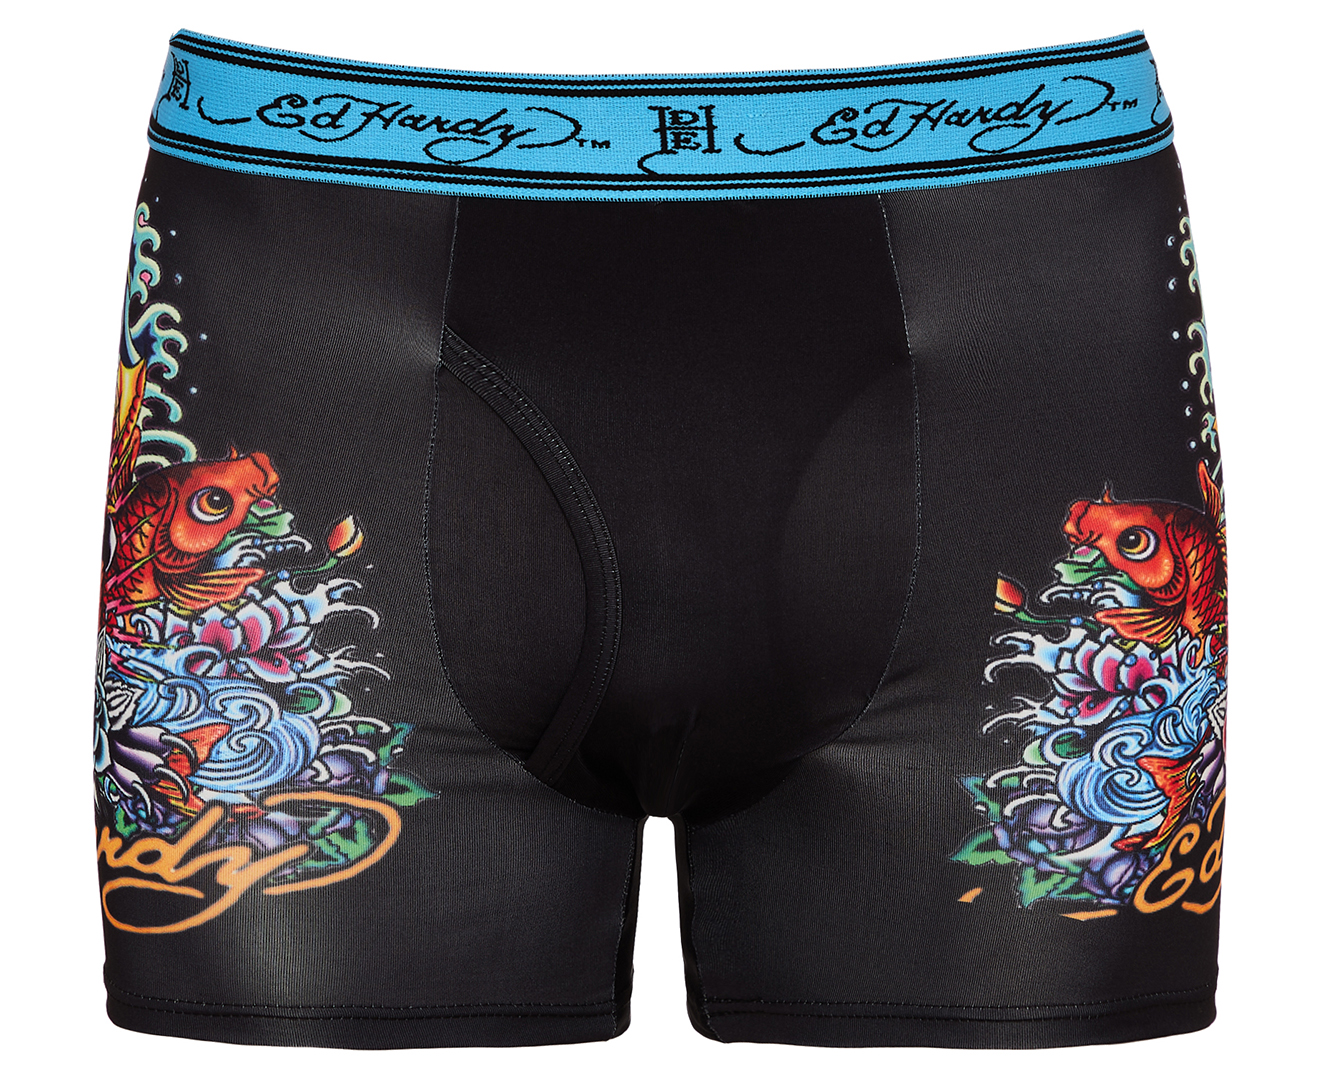 Ed Hardy Men's Performance Boxer Briefs 3-Pack - Assorted Prints